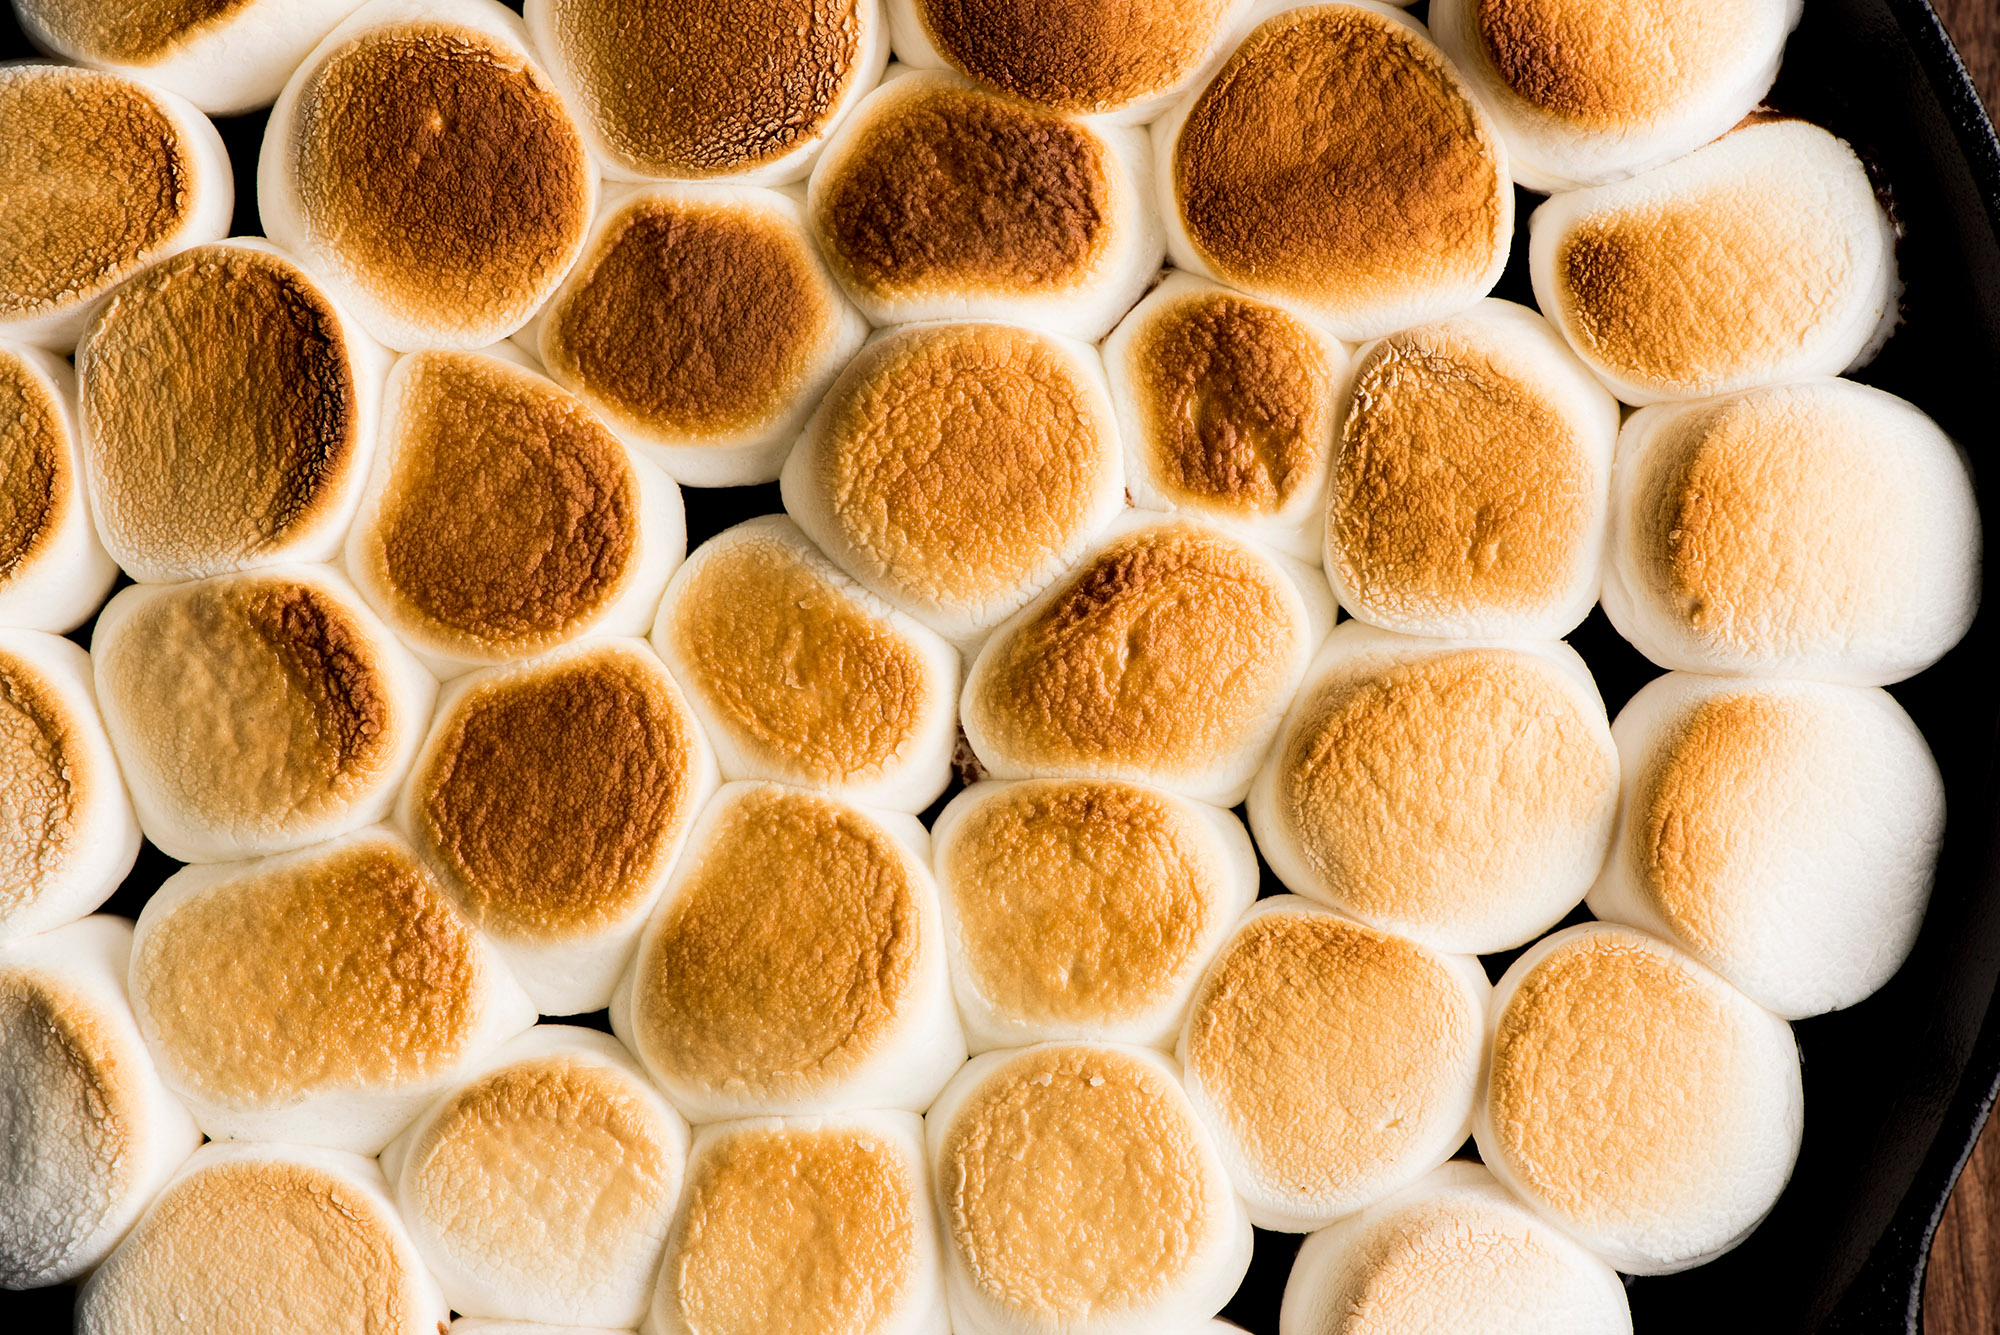 The Marshmallow Basics: Choosing and Prepping for the Perfect Toast